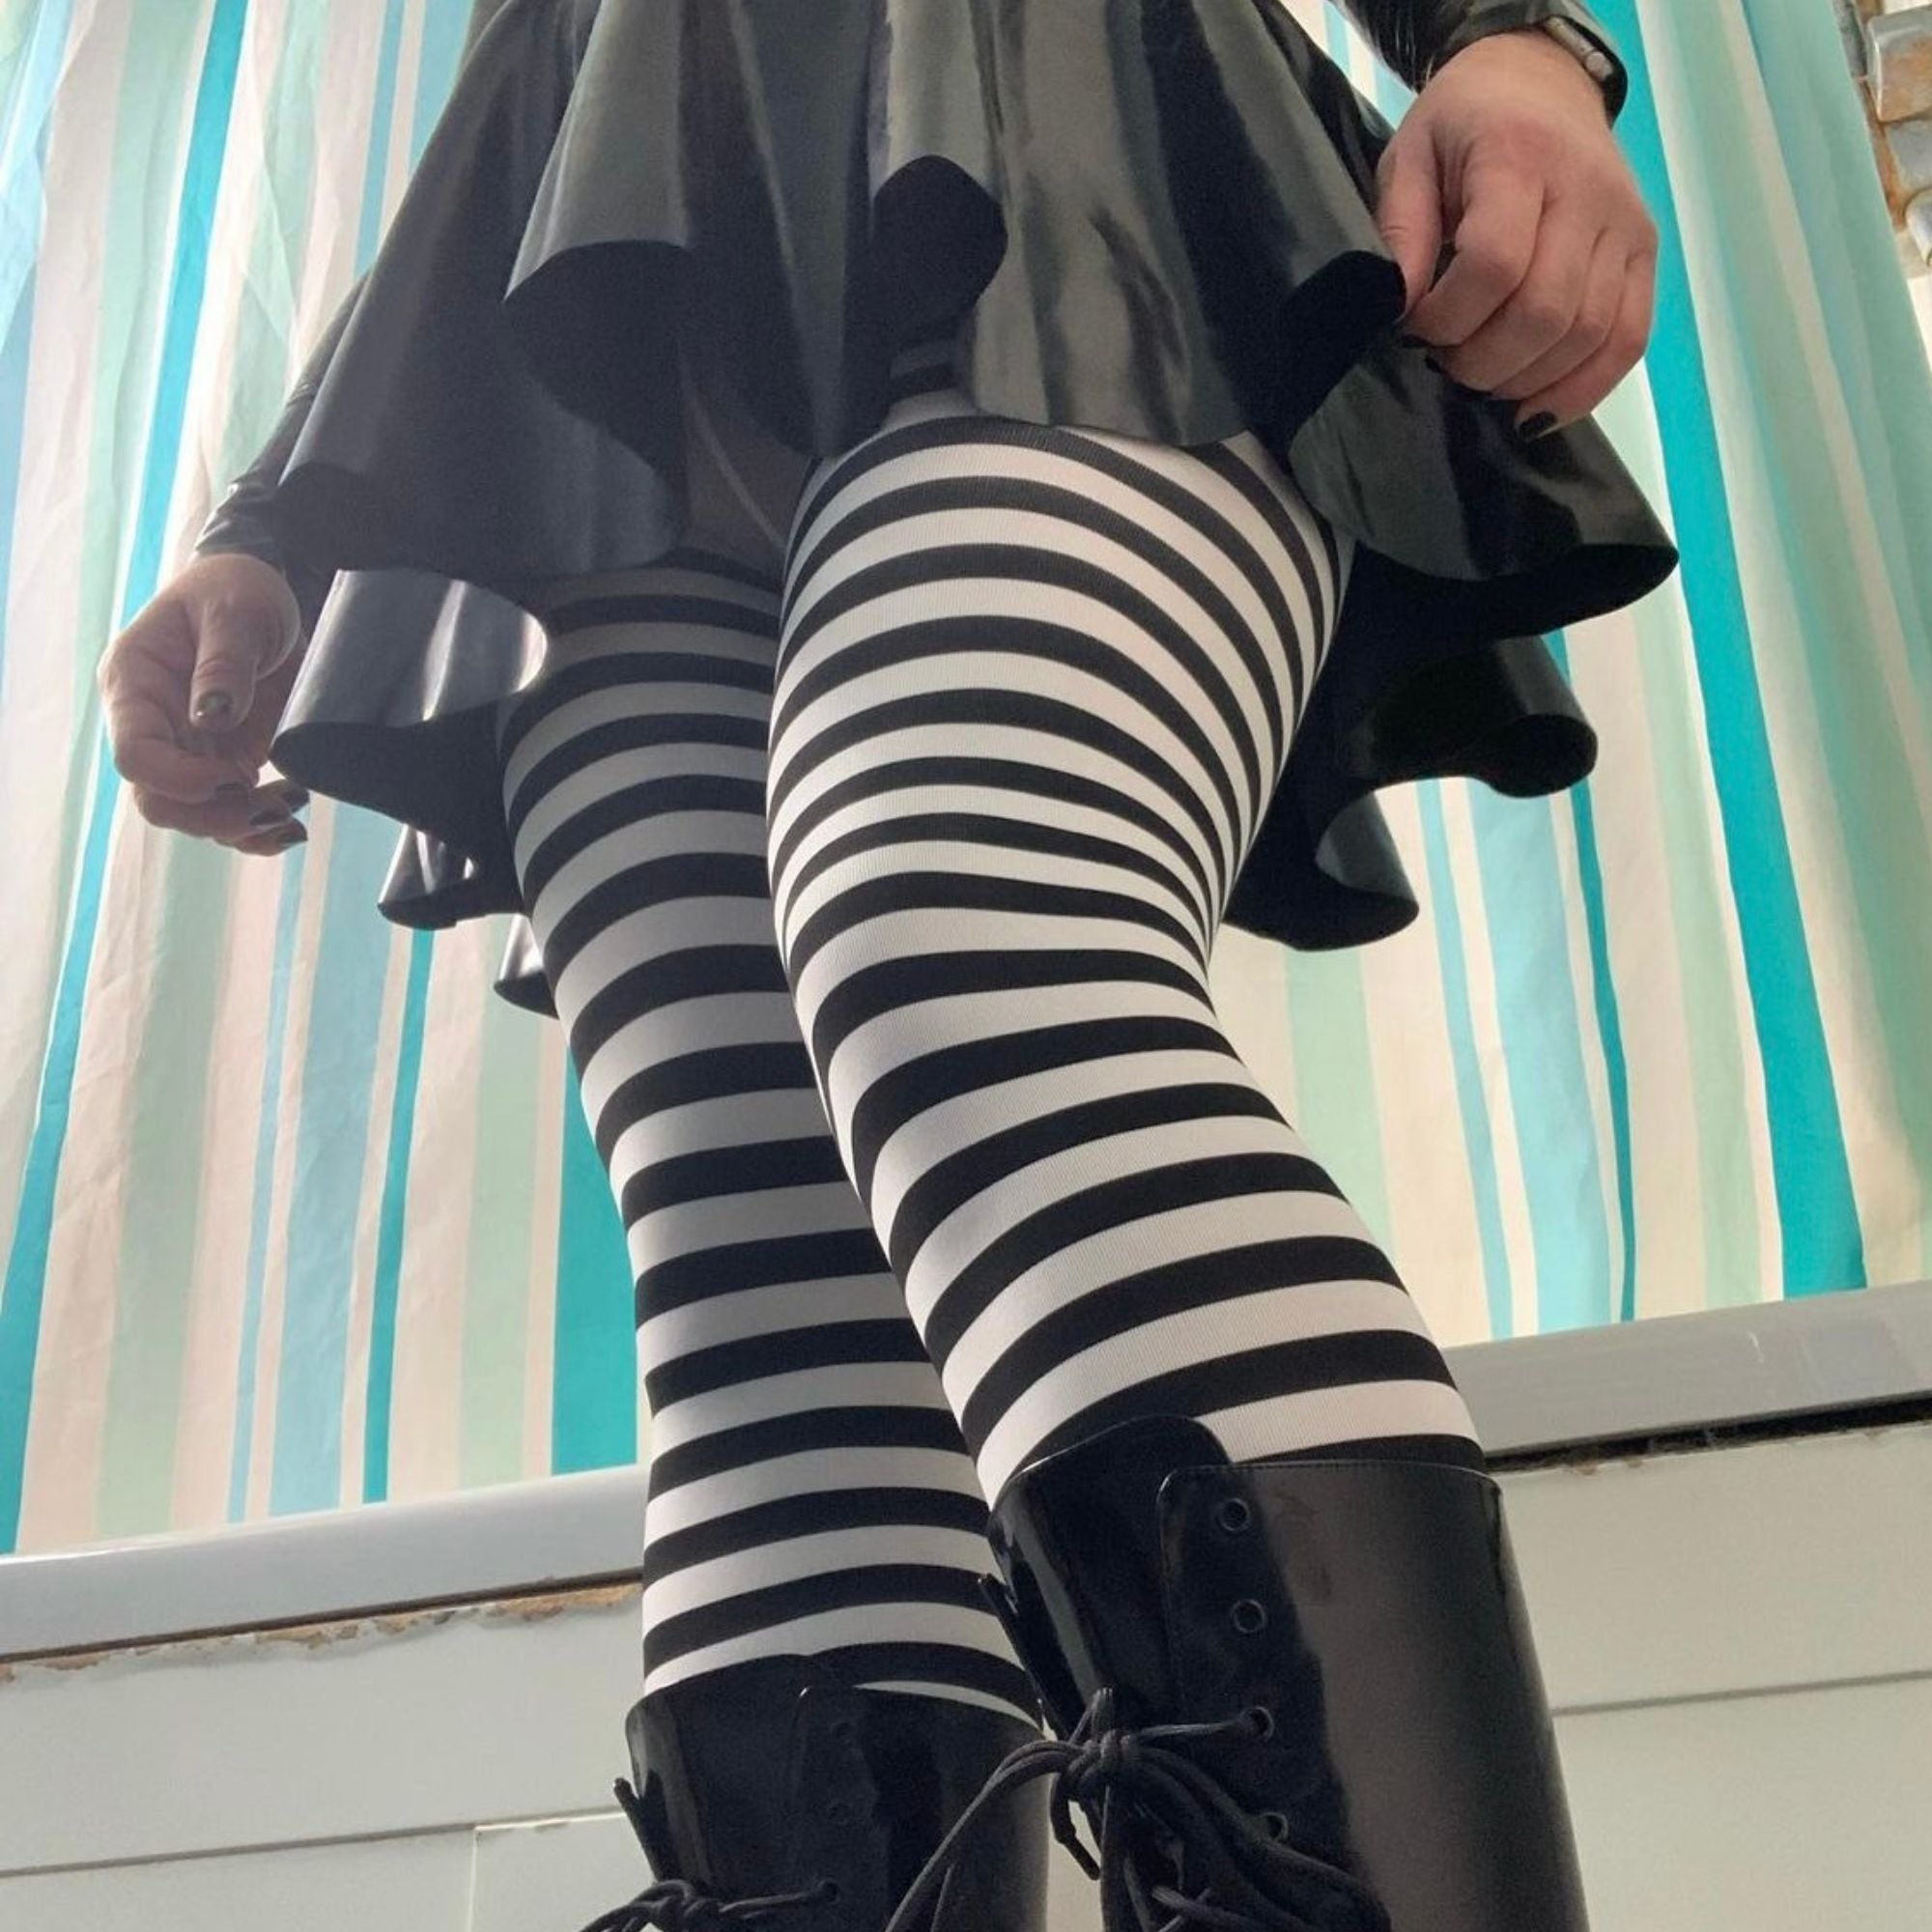 Black and White Stripe Tights Pantyhose -  Canada